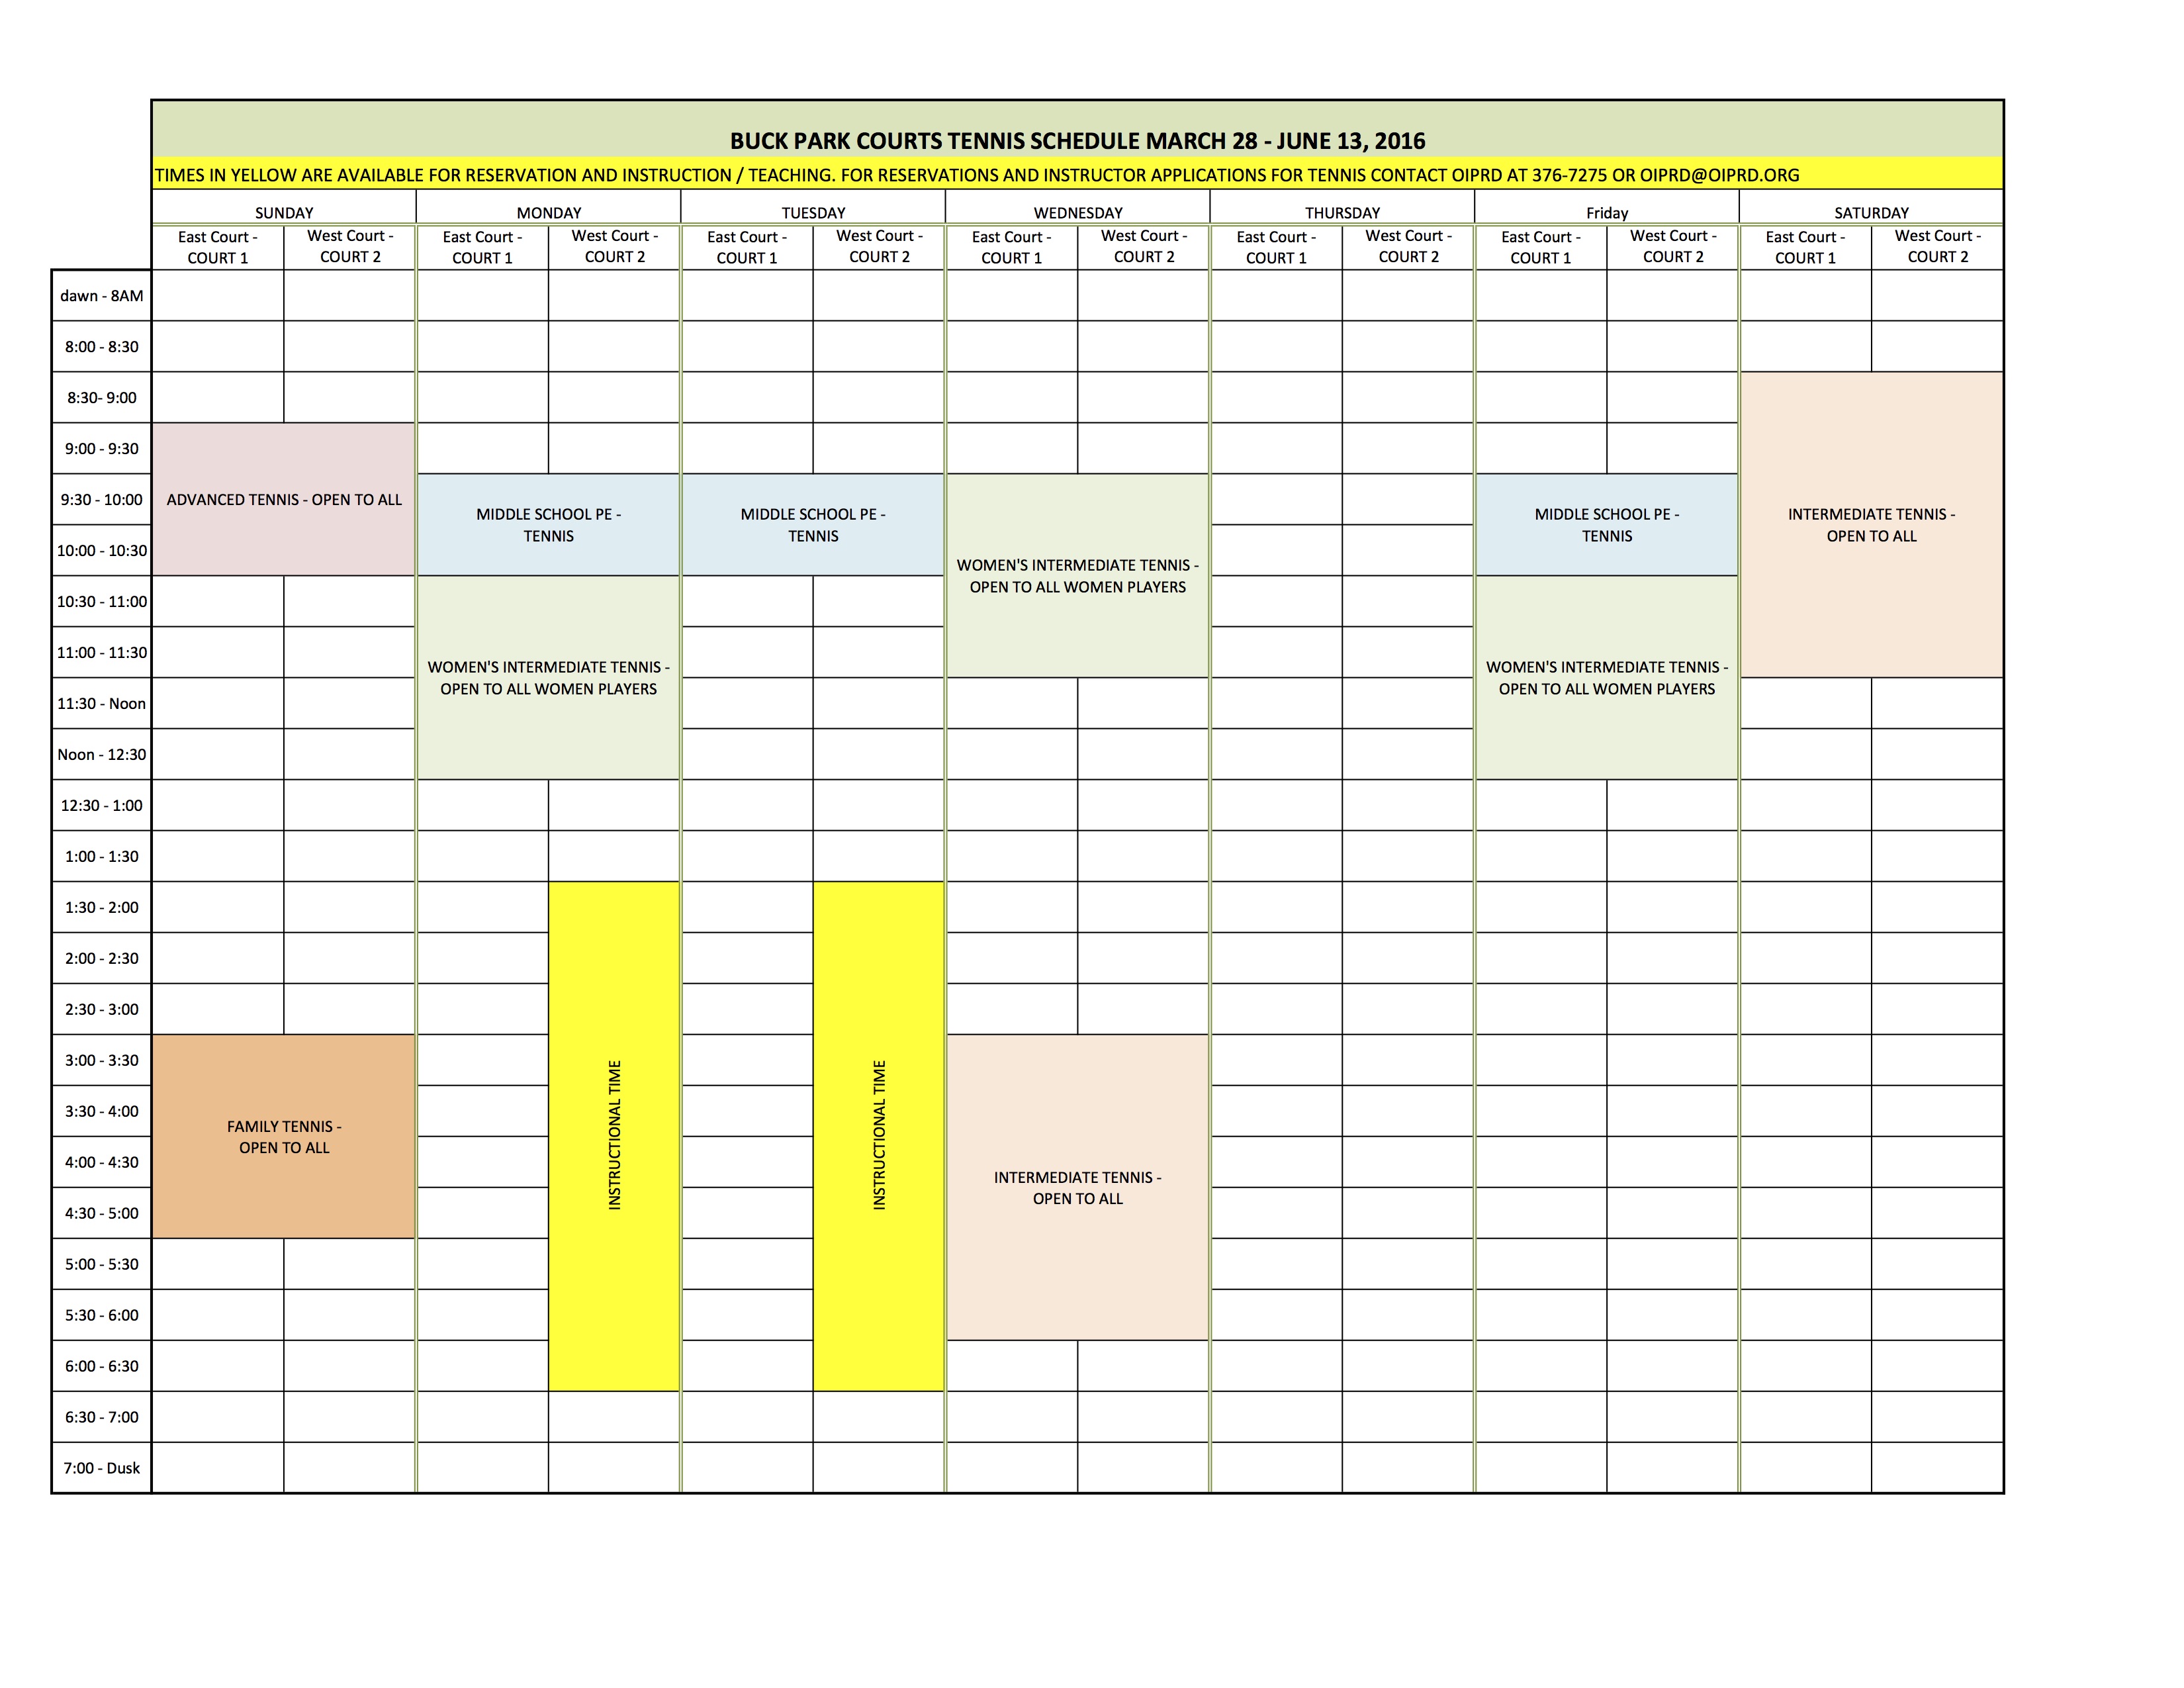 TENNIS SCHEDULE March 28 June 13 Orcas Island Park and Recreation